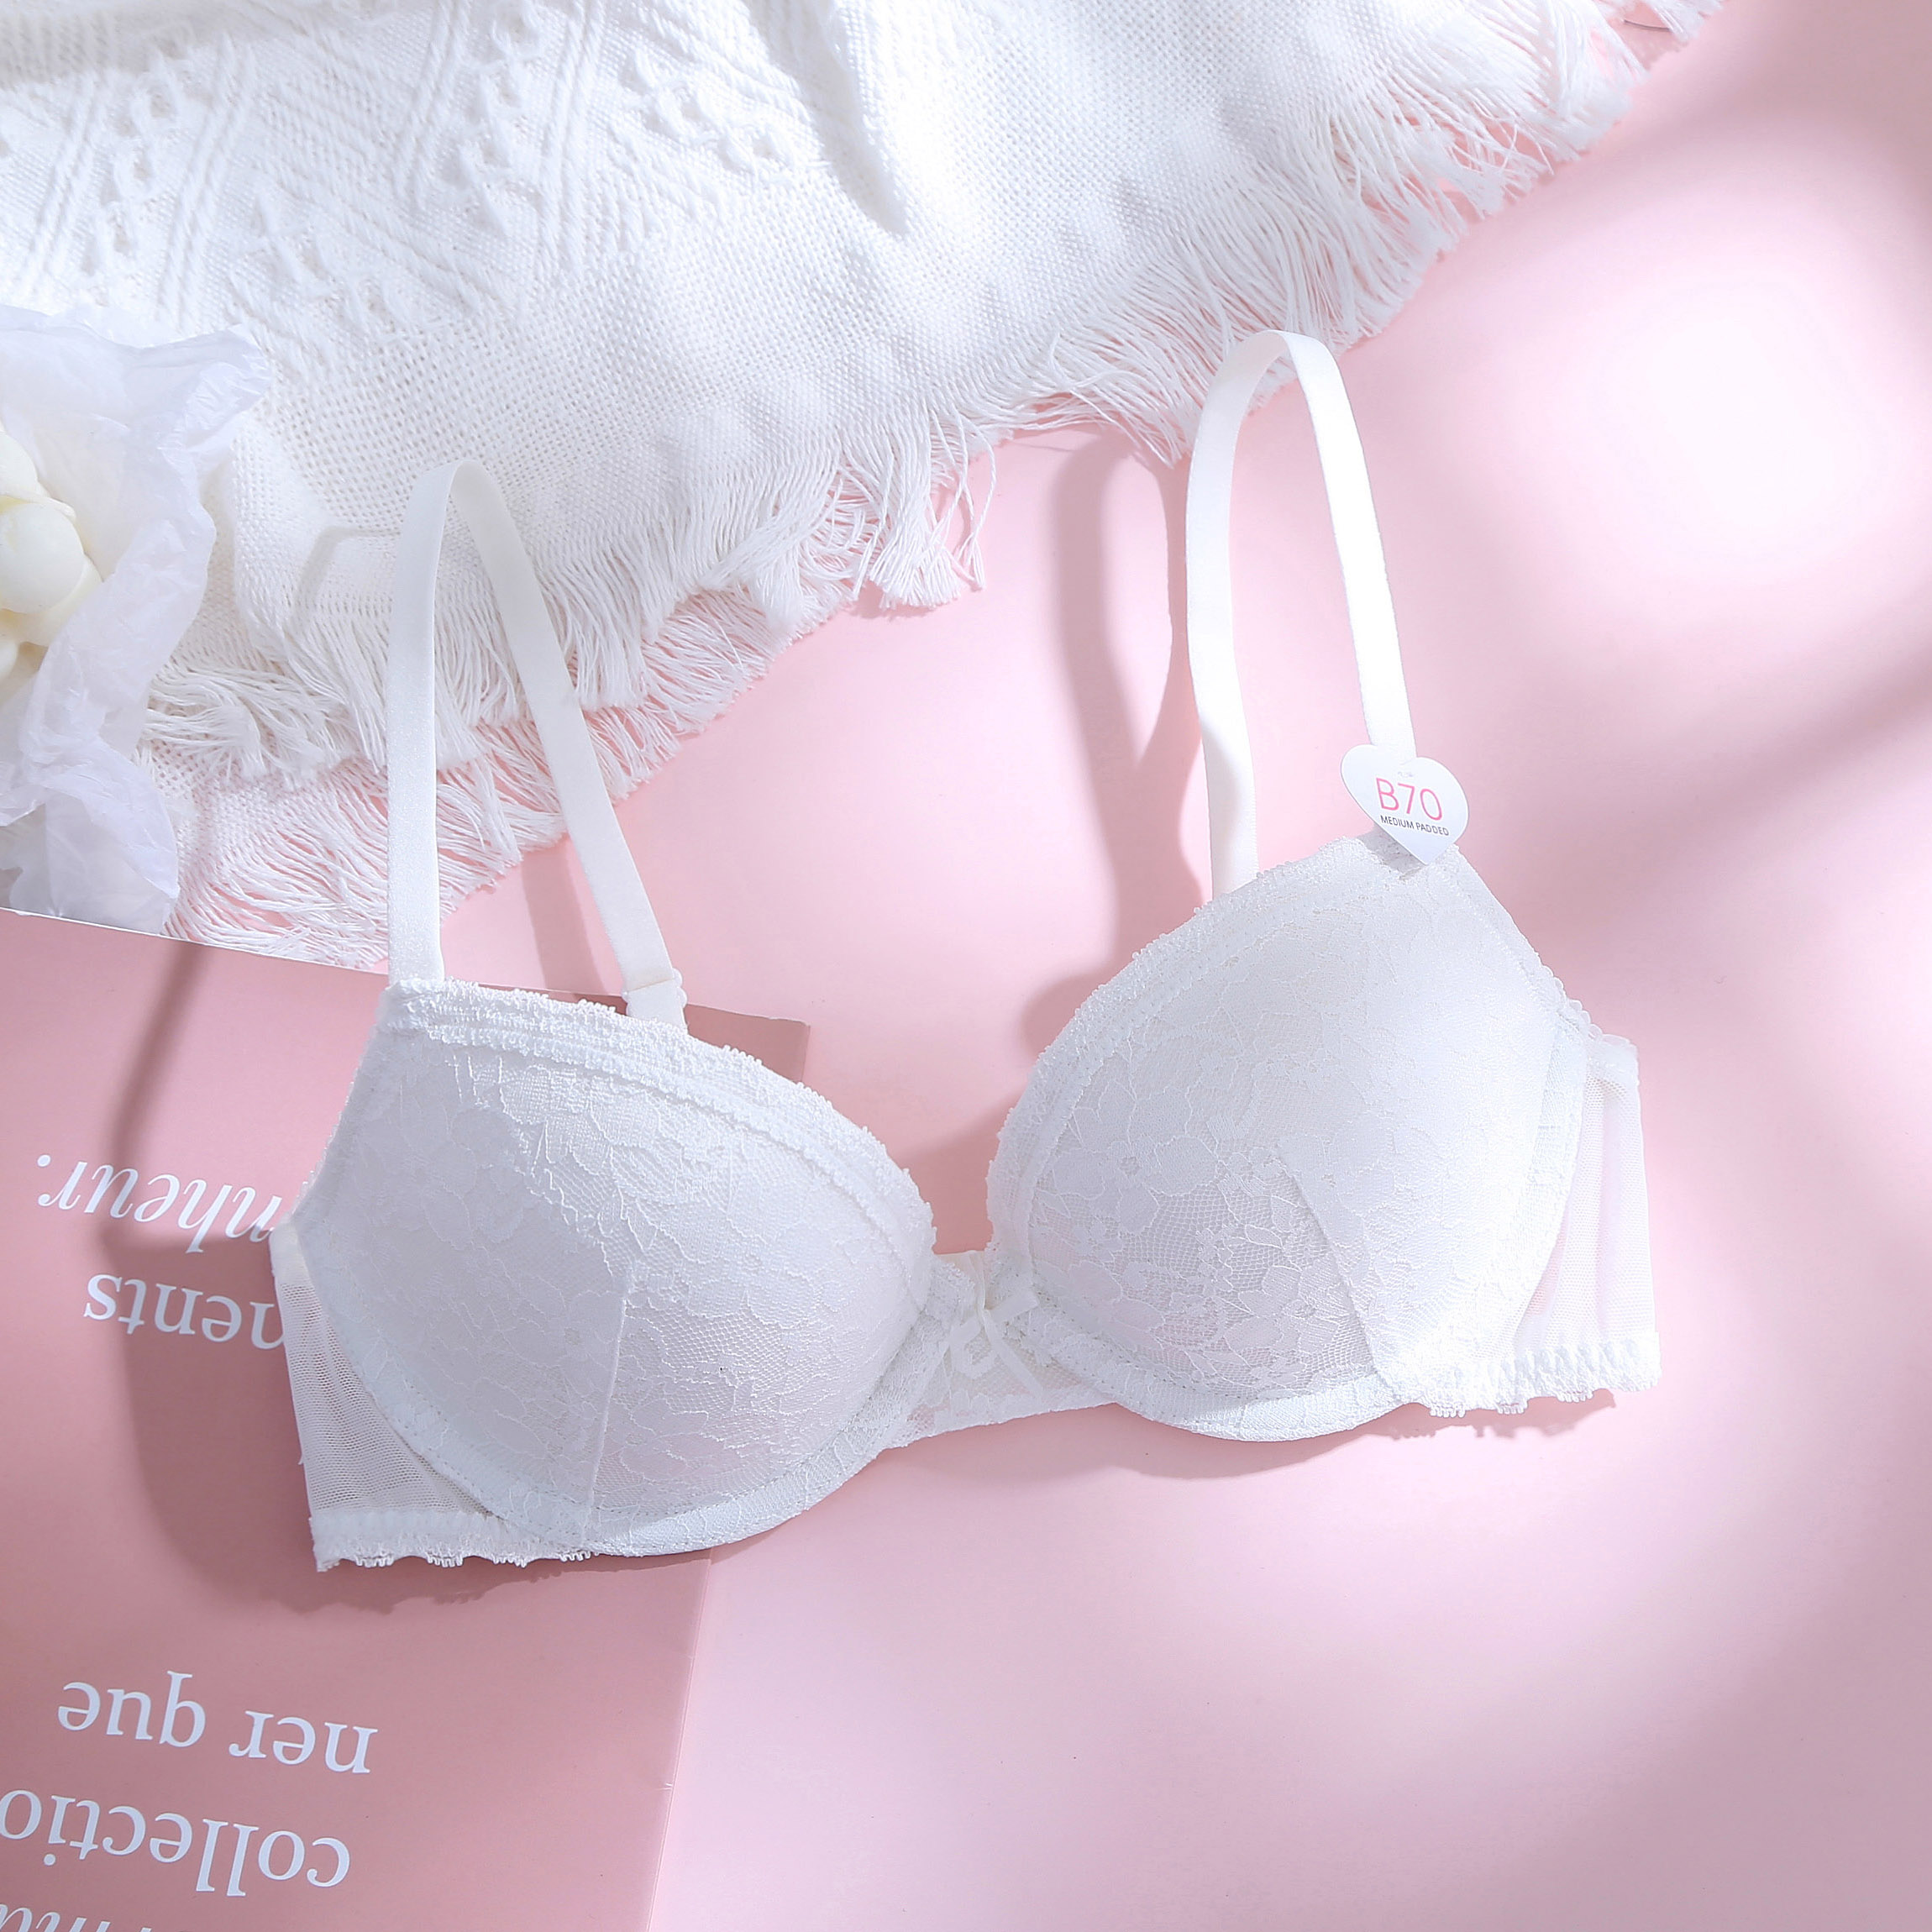 6IXTY8IGHT on Instagram: Fashionable & sassy 💖 The lace bralette look  that never go out of style ✨ 🌸 CHRISTINE wireless lace bralette BR13167  #68Fashion #68Lingerie